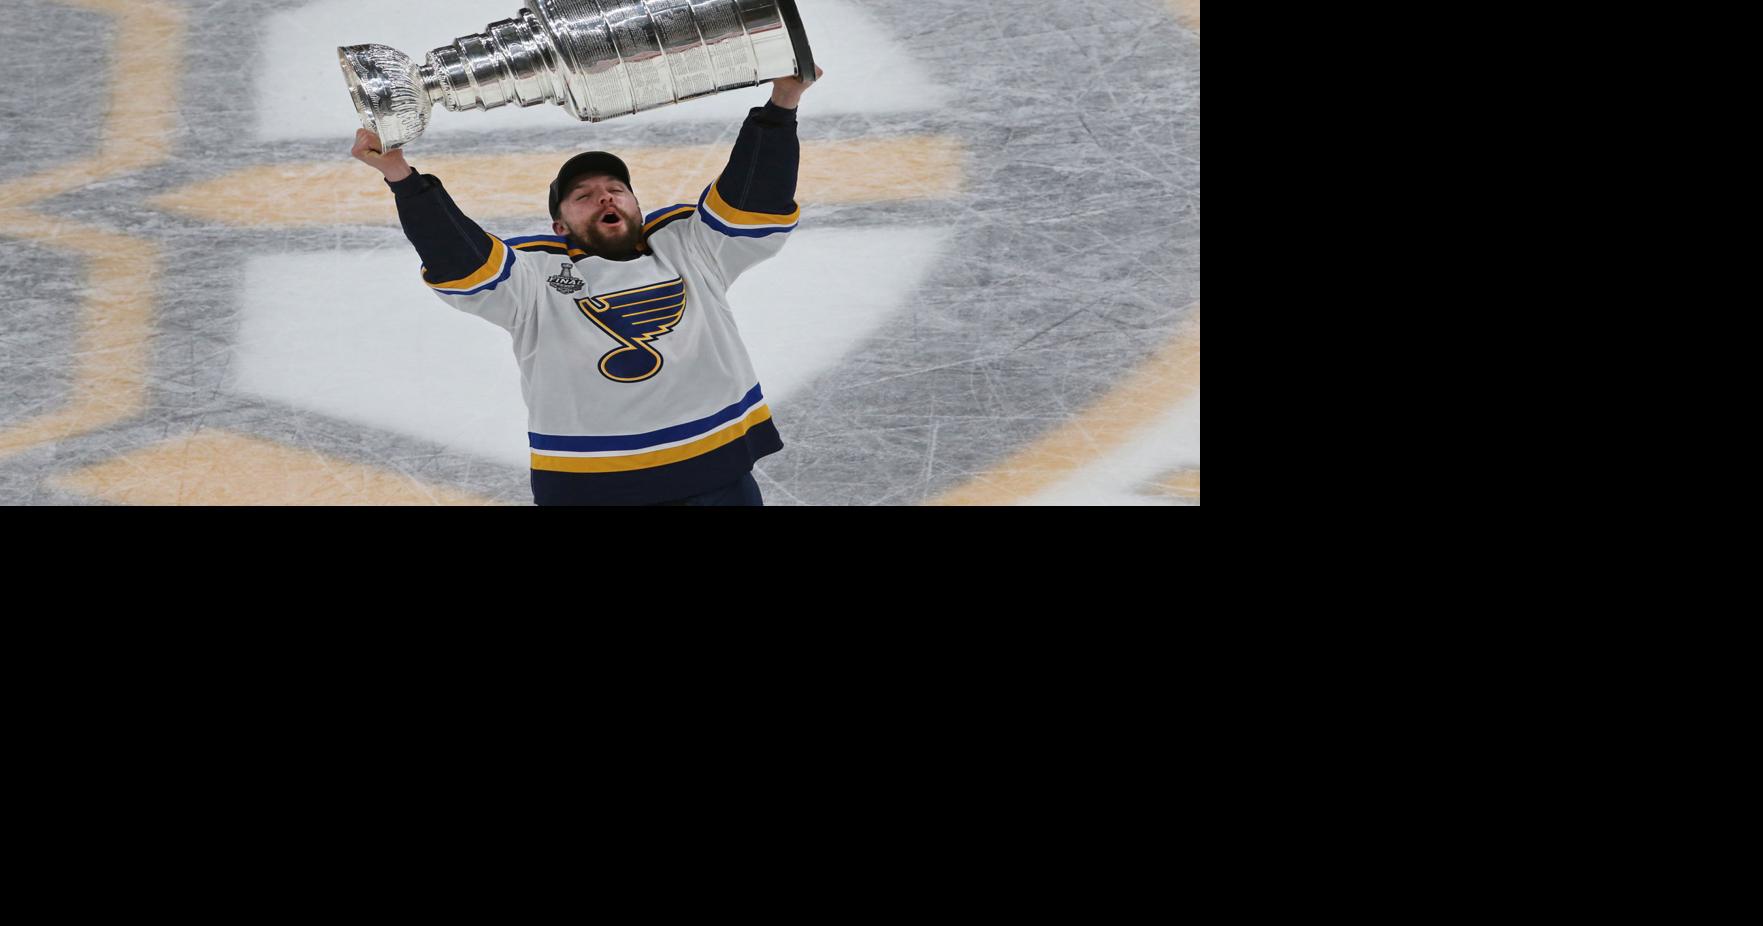 London celebrates local connections as St. Louis Blues win Stanley Cup -  London